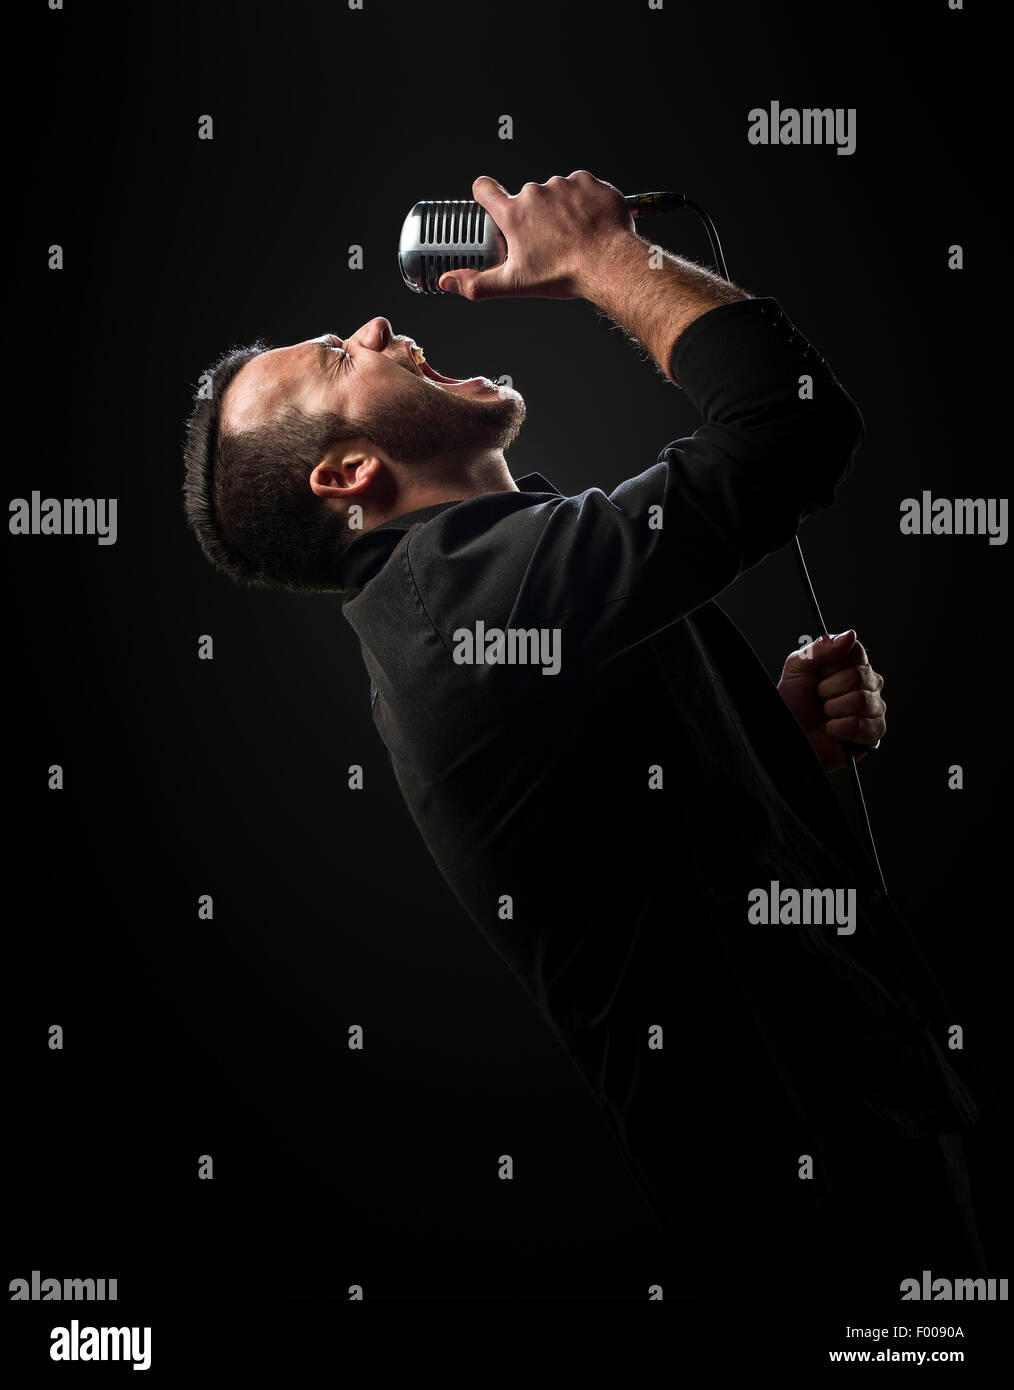 Singer performing with microphone against dark background Stock Photo